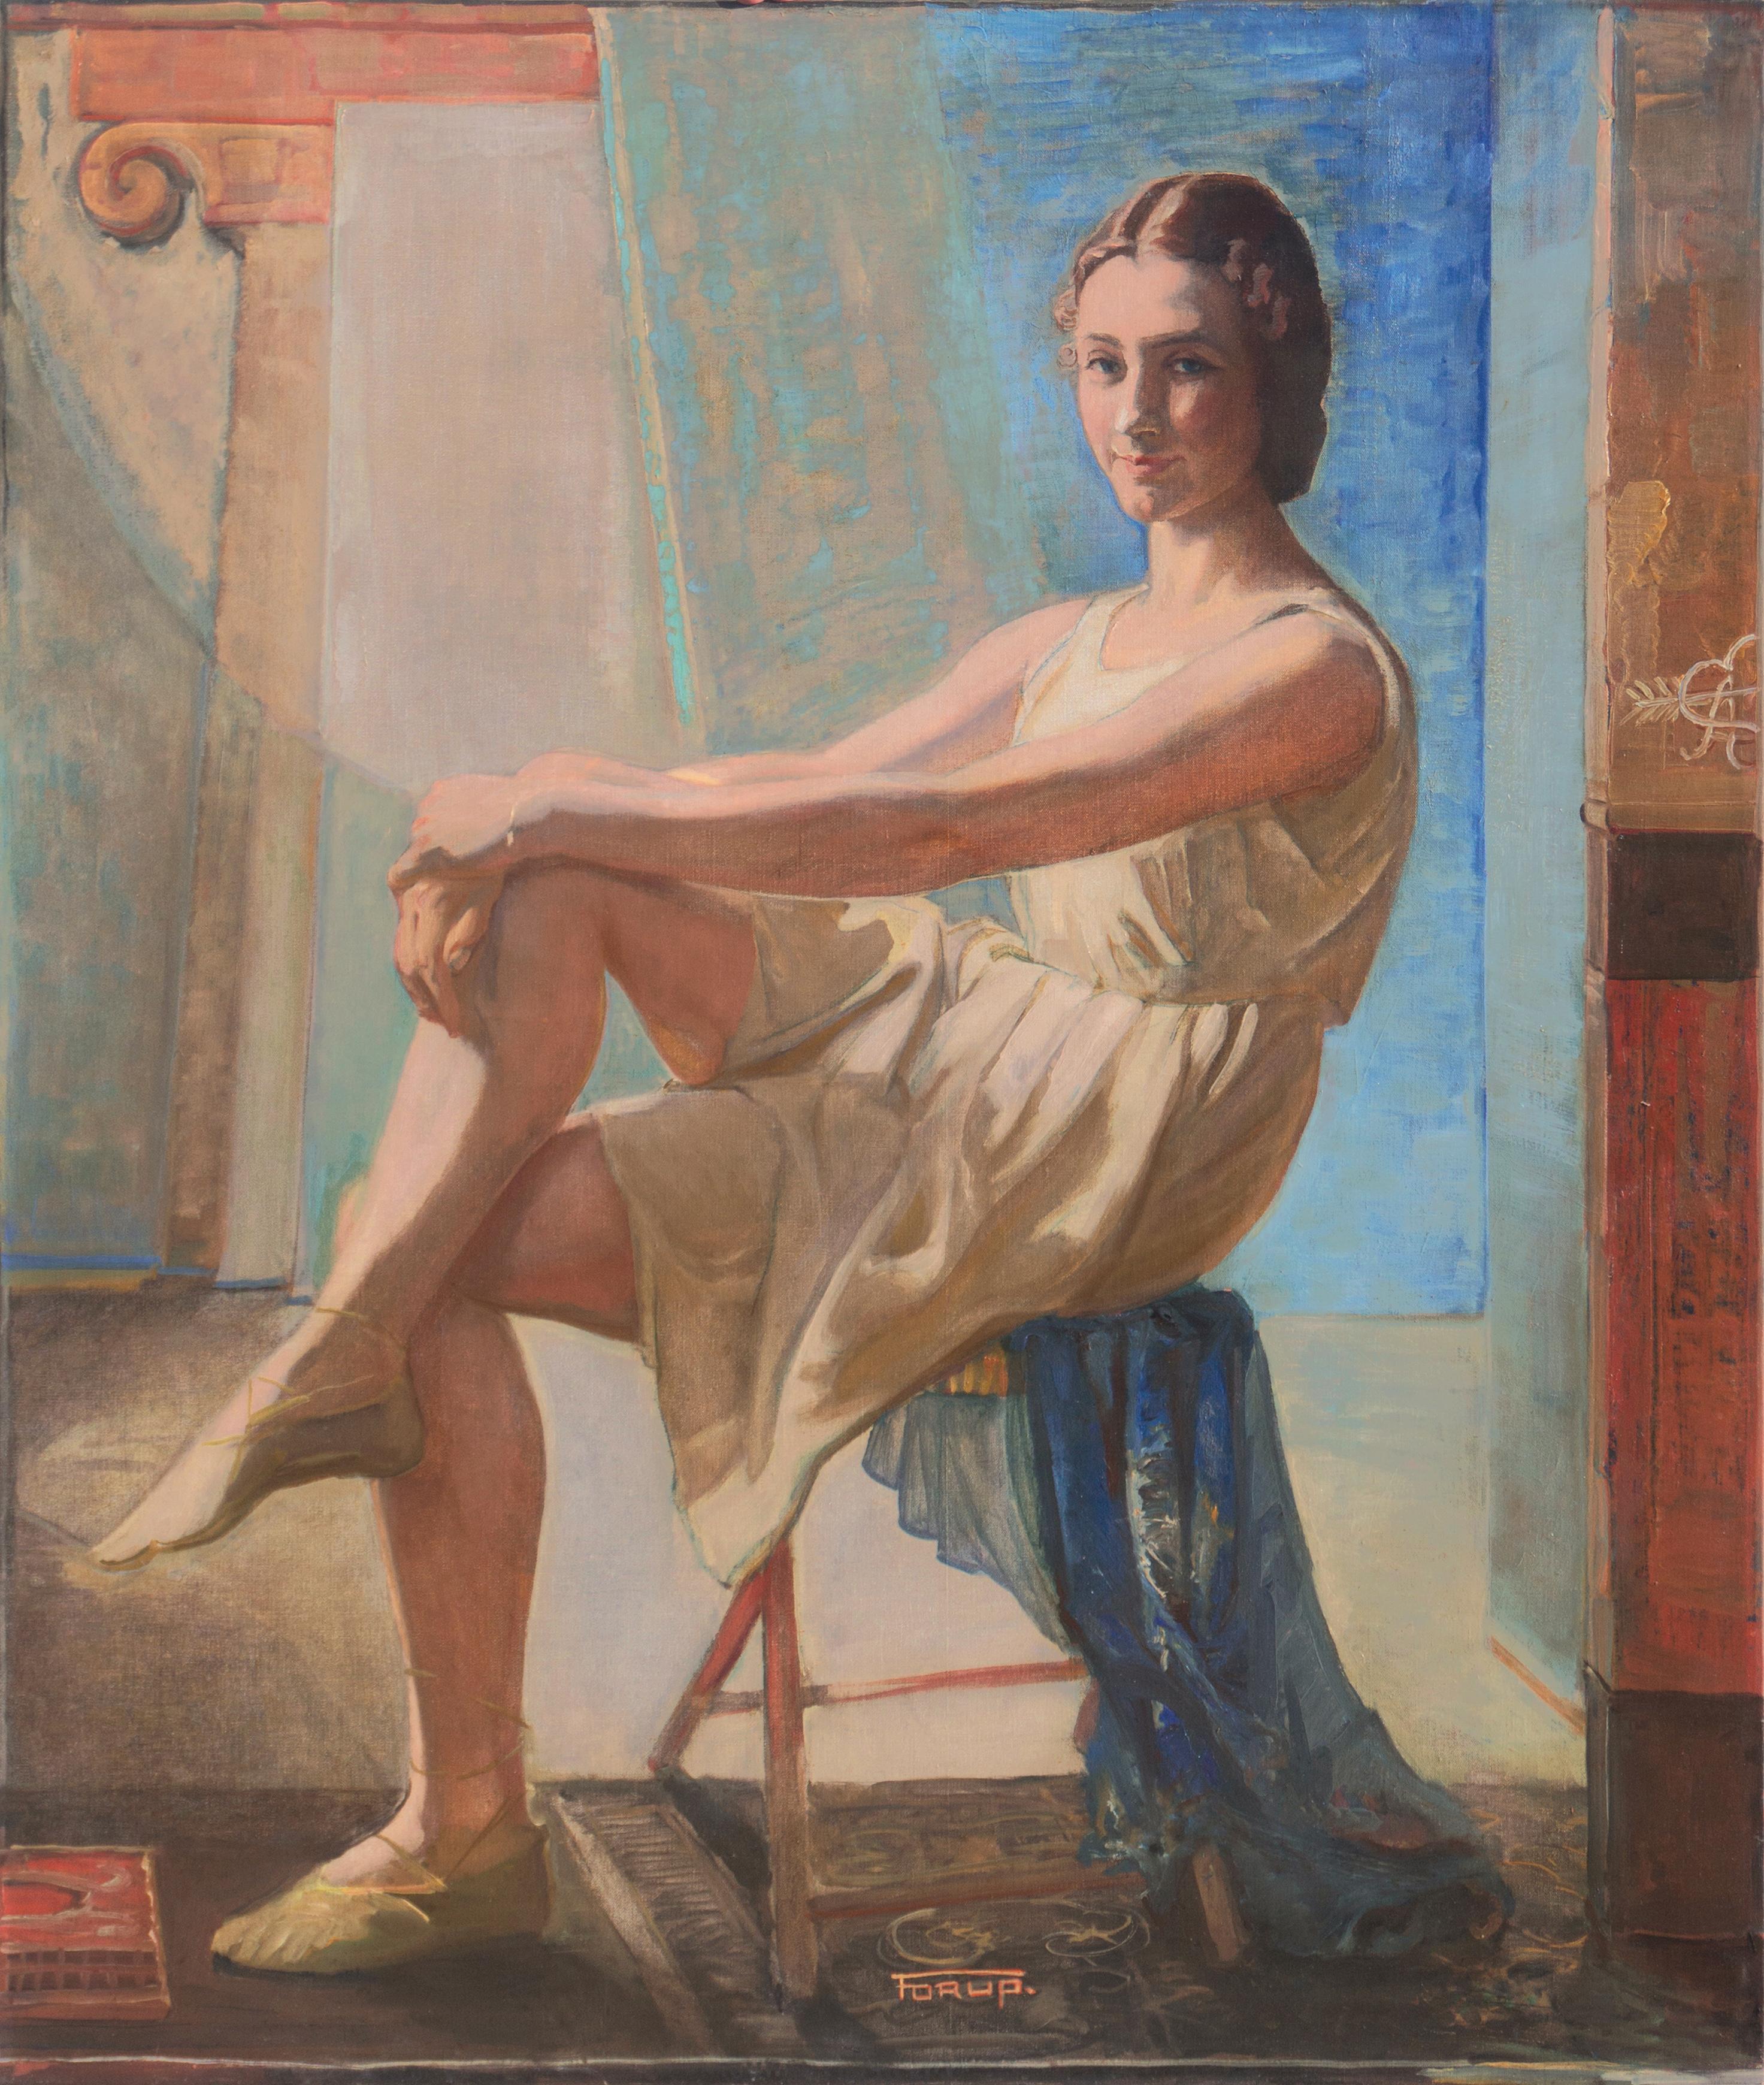 Carl Christian Forup Figurative Painting - 'Neo-Classical Ballerina', Paris, Royal Danish Academy Oil, Student of Matisse